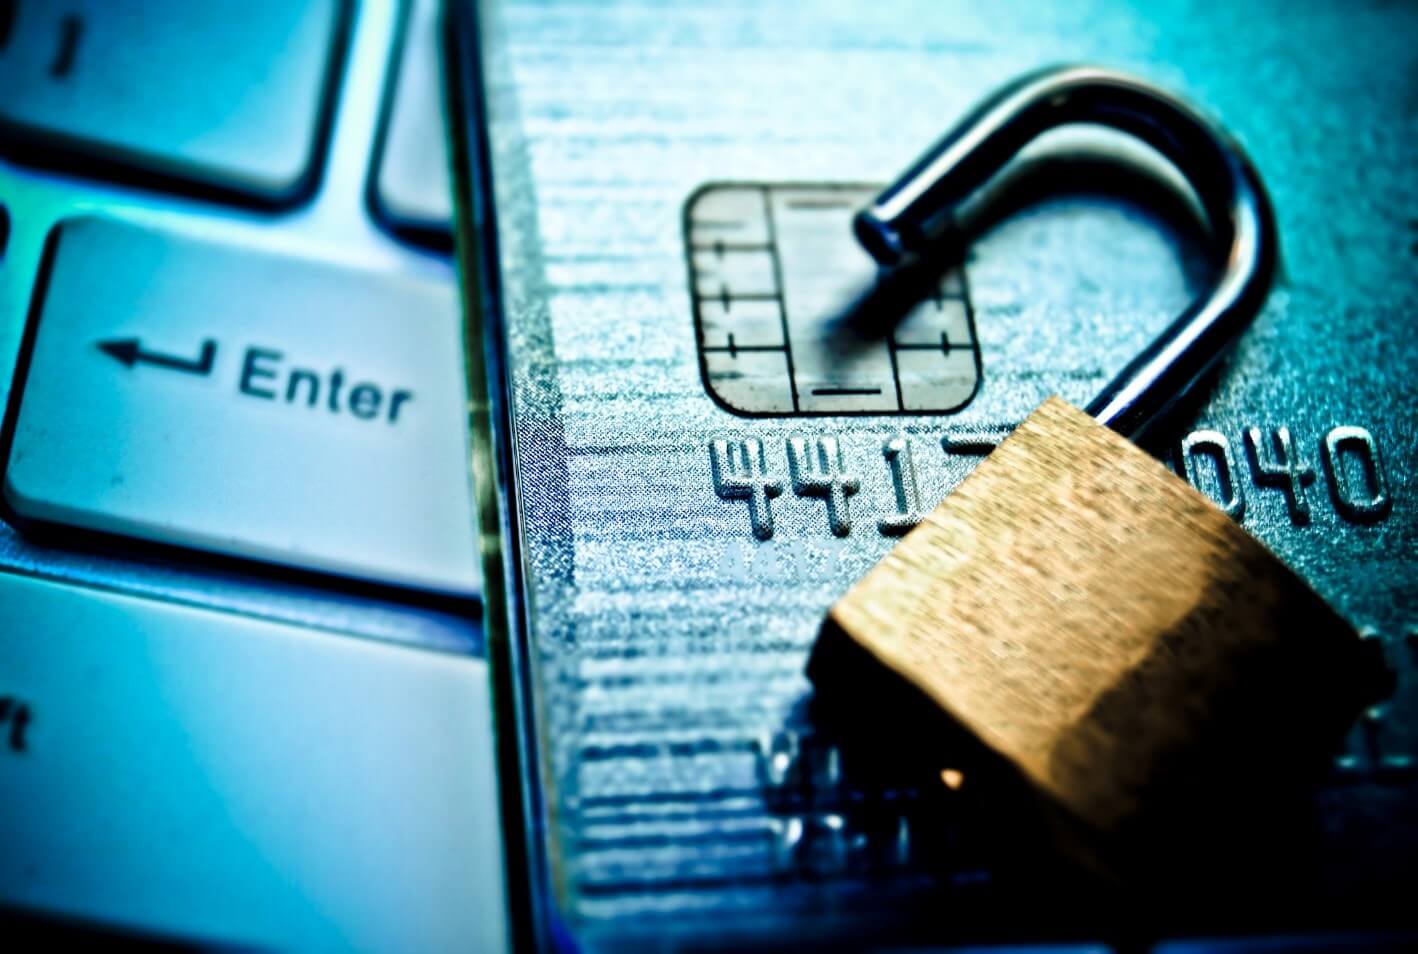 lock on the credit card to prevent theft